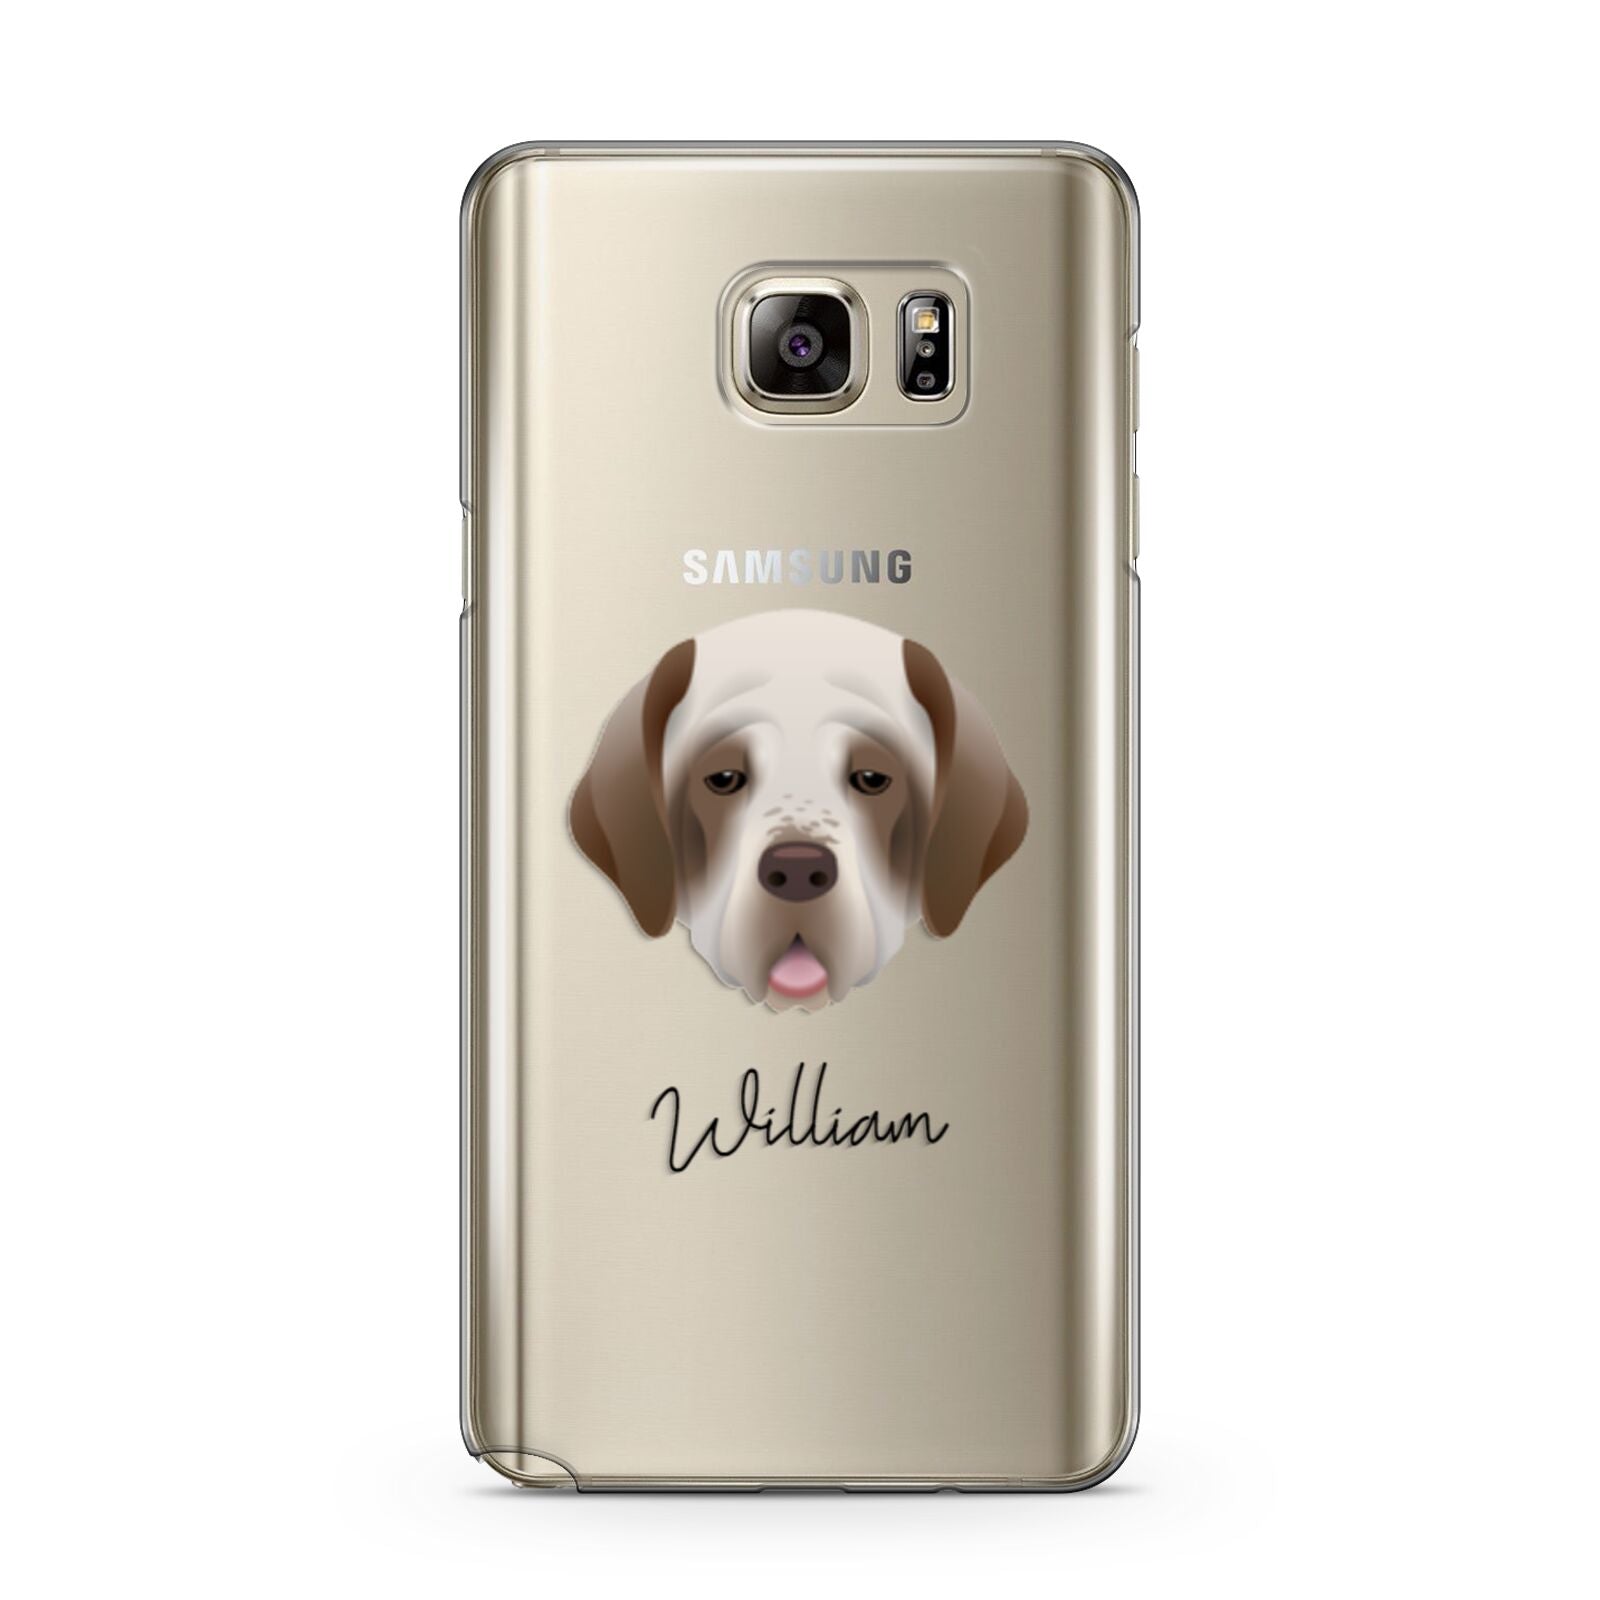 Clumber Spaniel Personalised Samsung Galaxy Note 5 Case